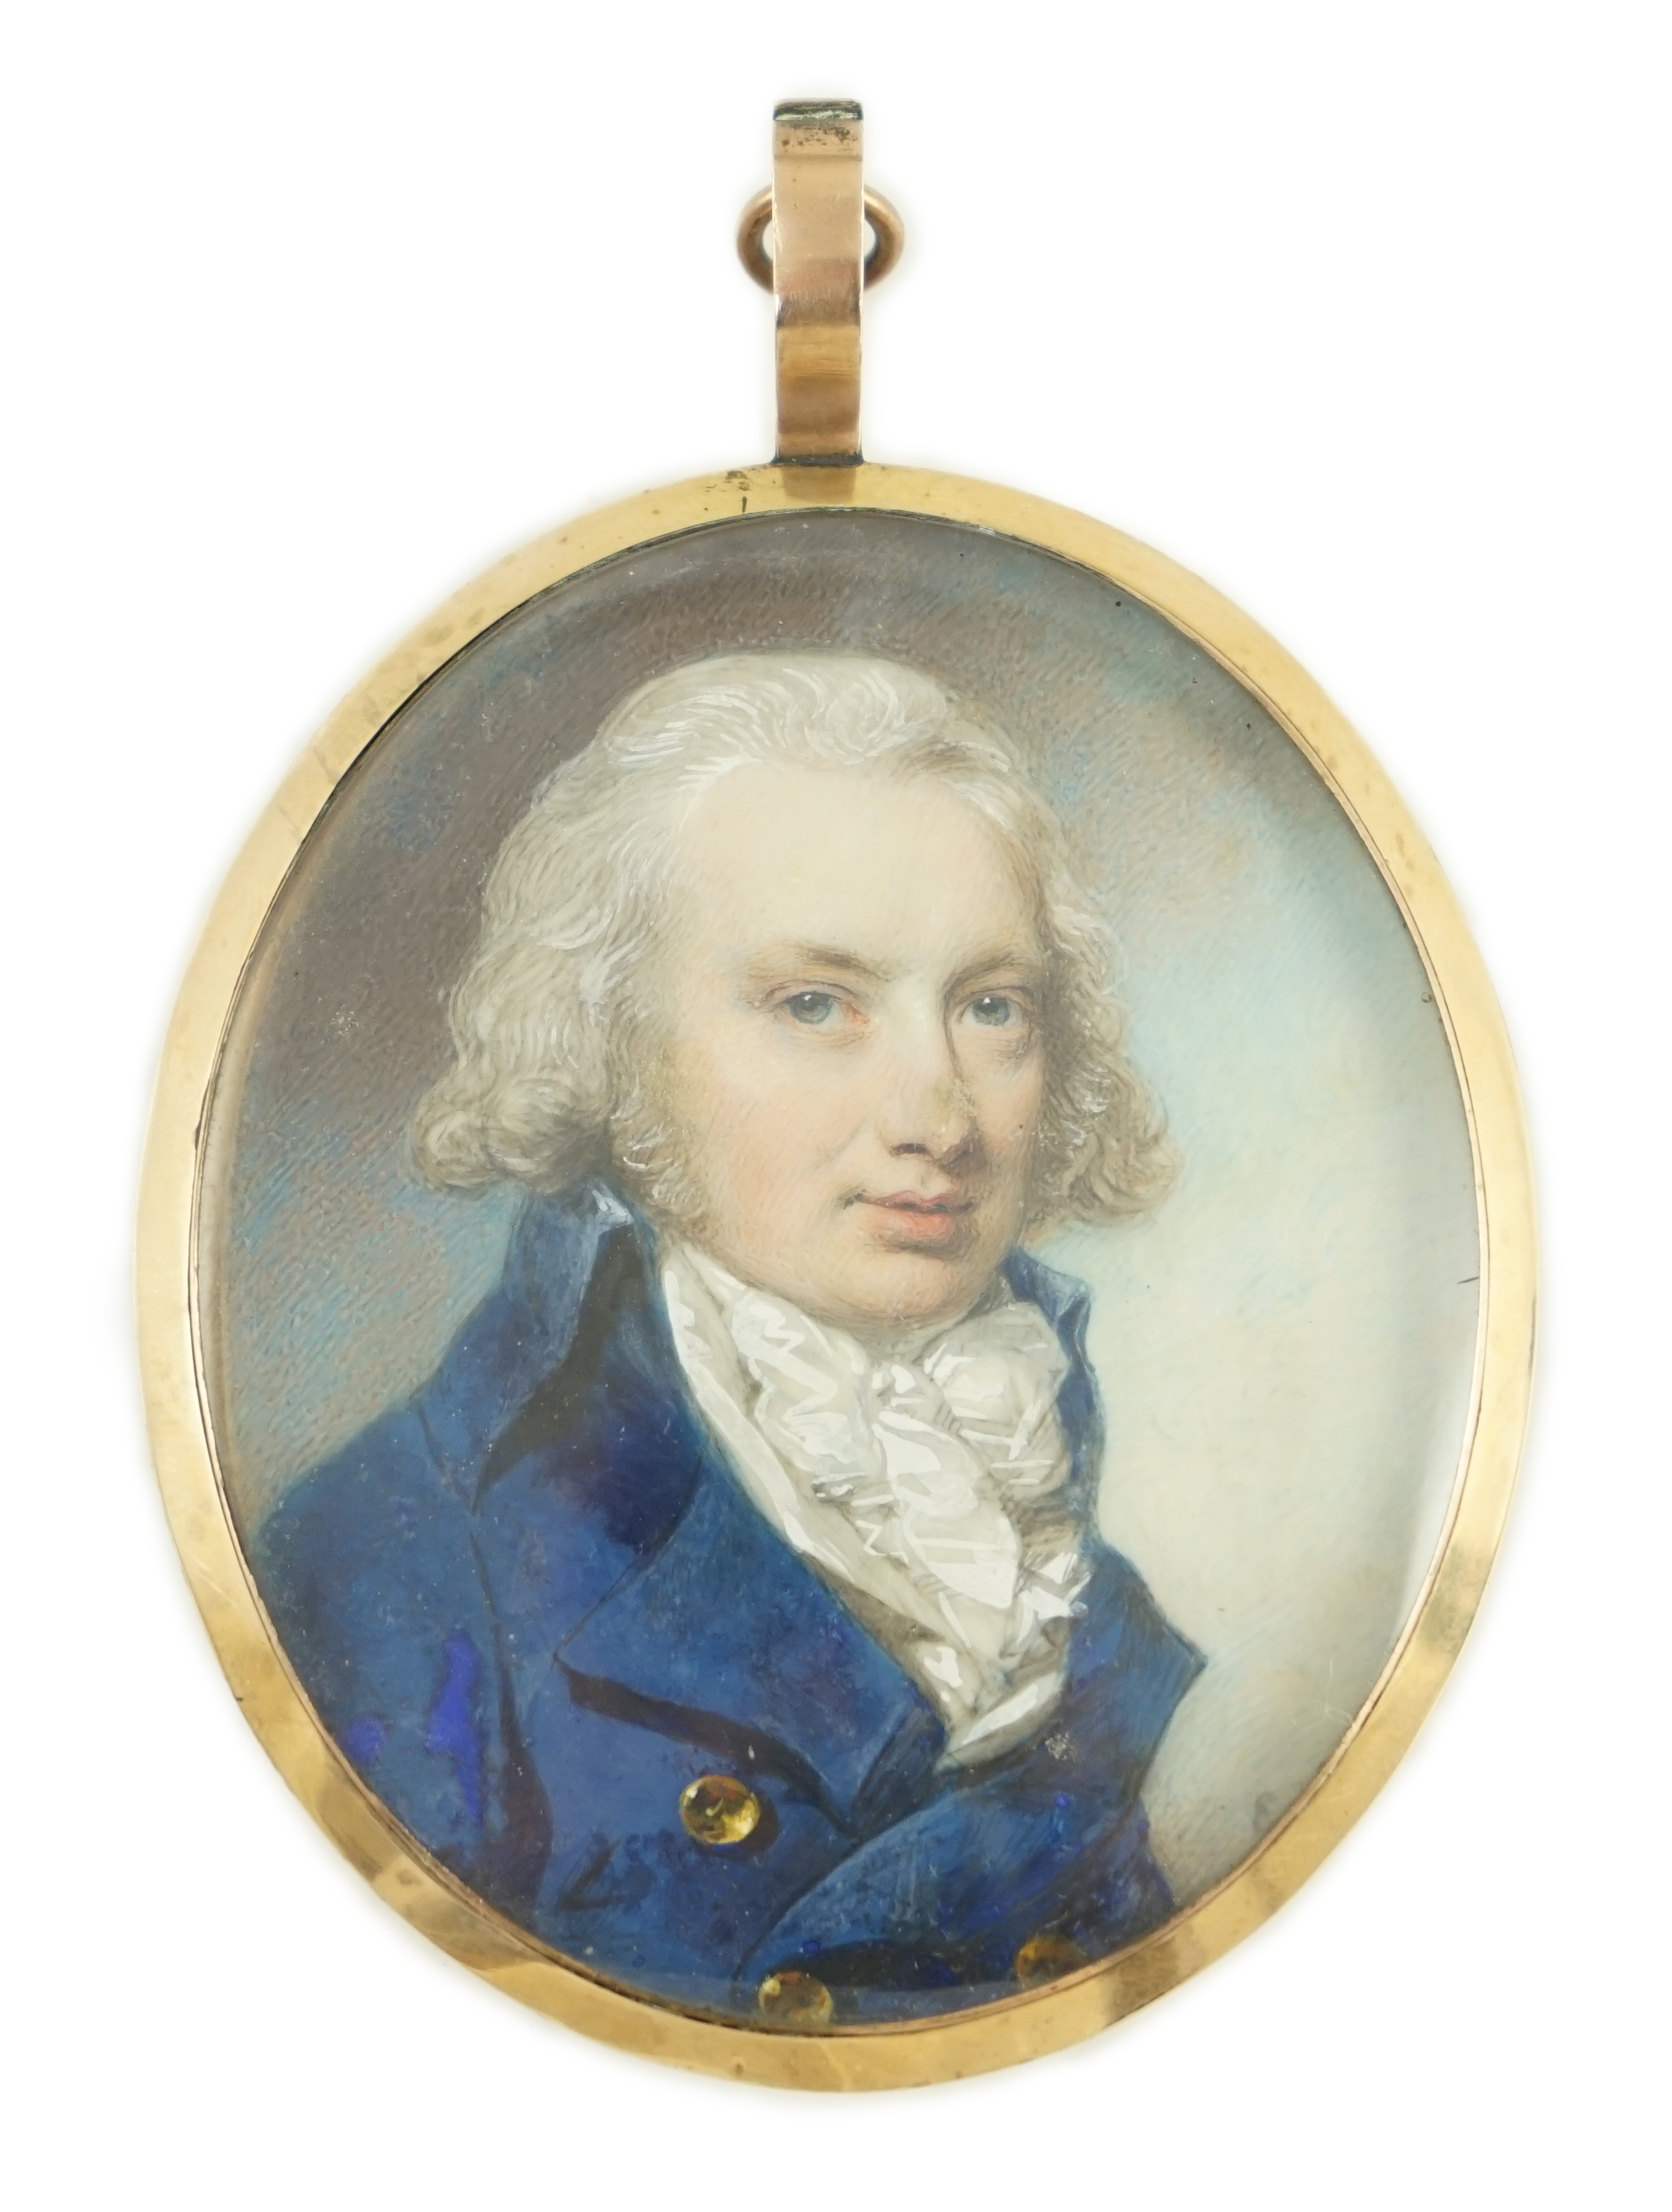 George Engleheart (1750-1829), Portrait miniature of a gentleman, watercolour on ivory, 6 x 5cm. CITES Submission reference BDTXA84Q